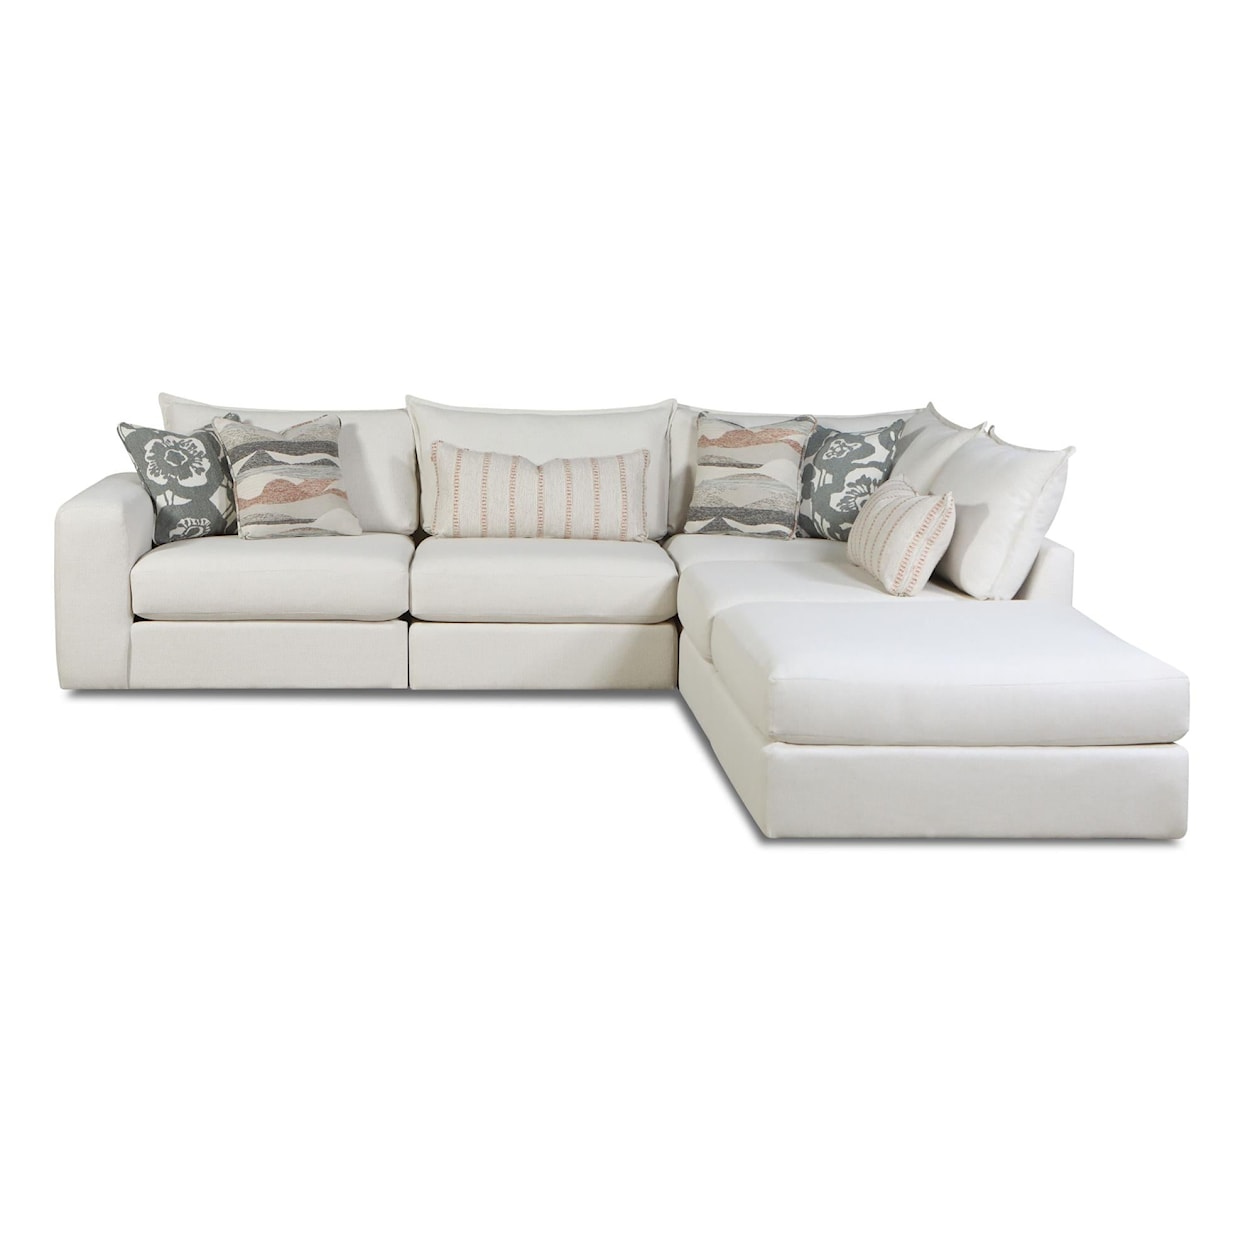 Fusion Furniture 7000 MISSIONARY SALT Modular Sectional - Ottoman sold Separately